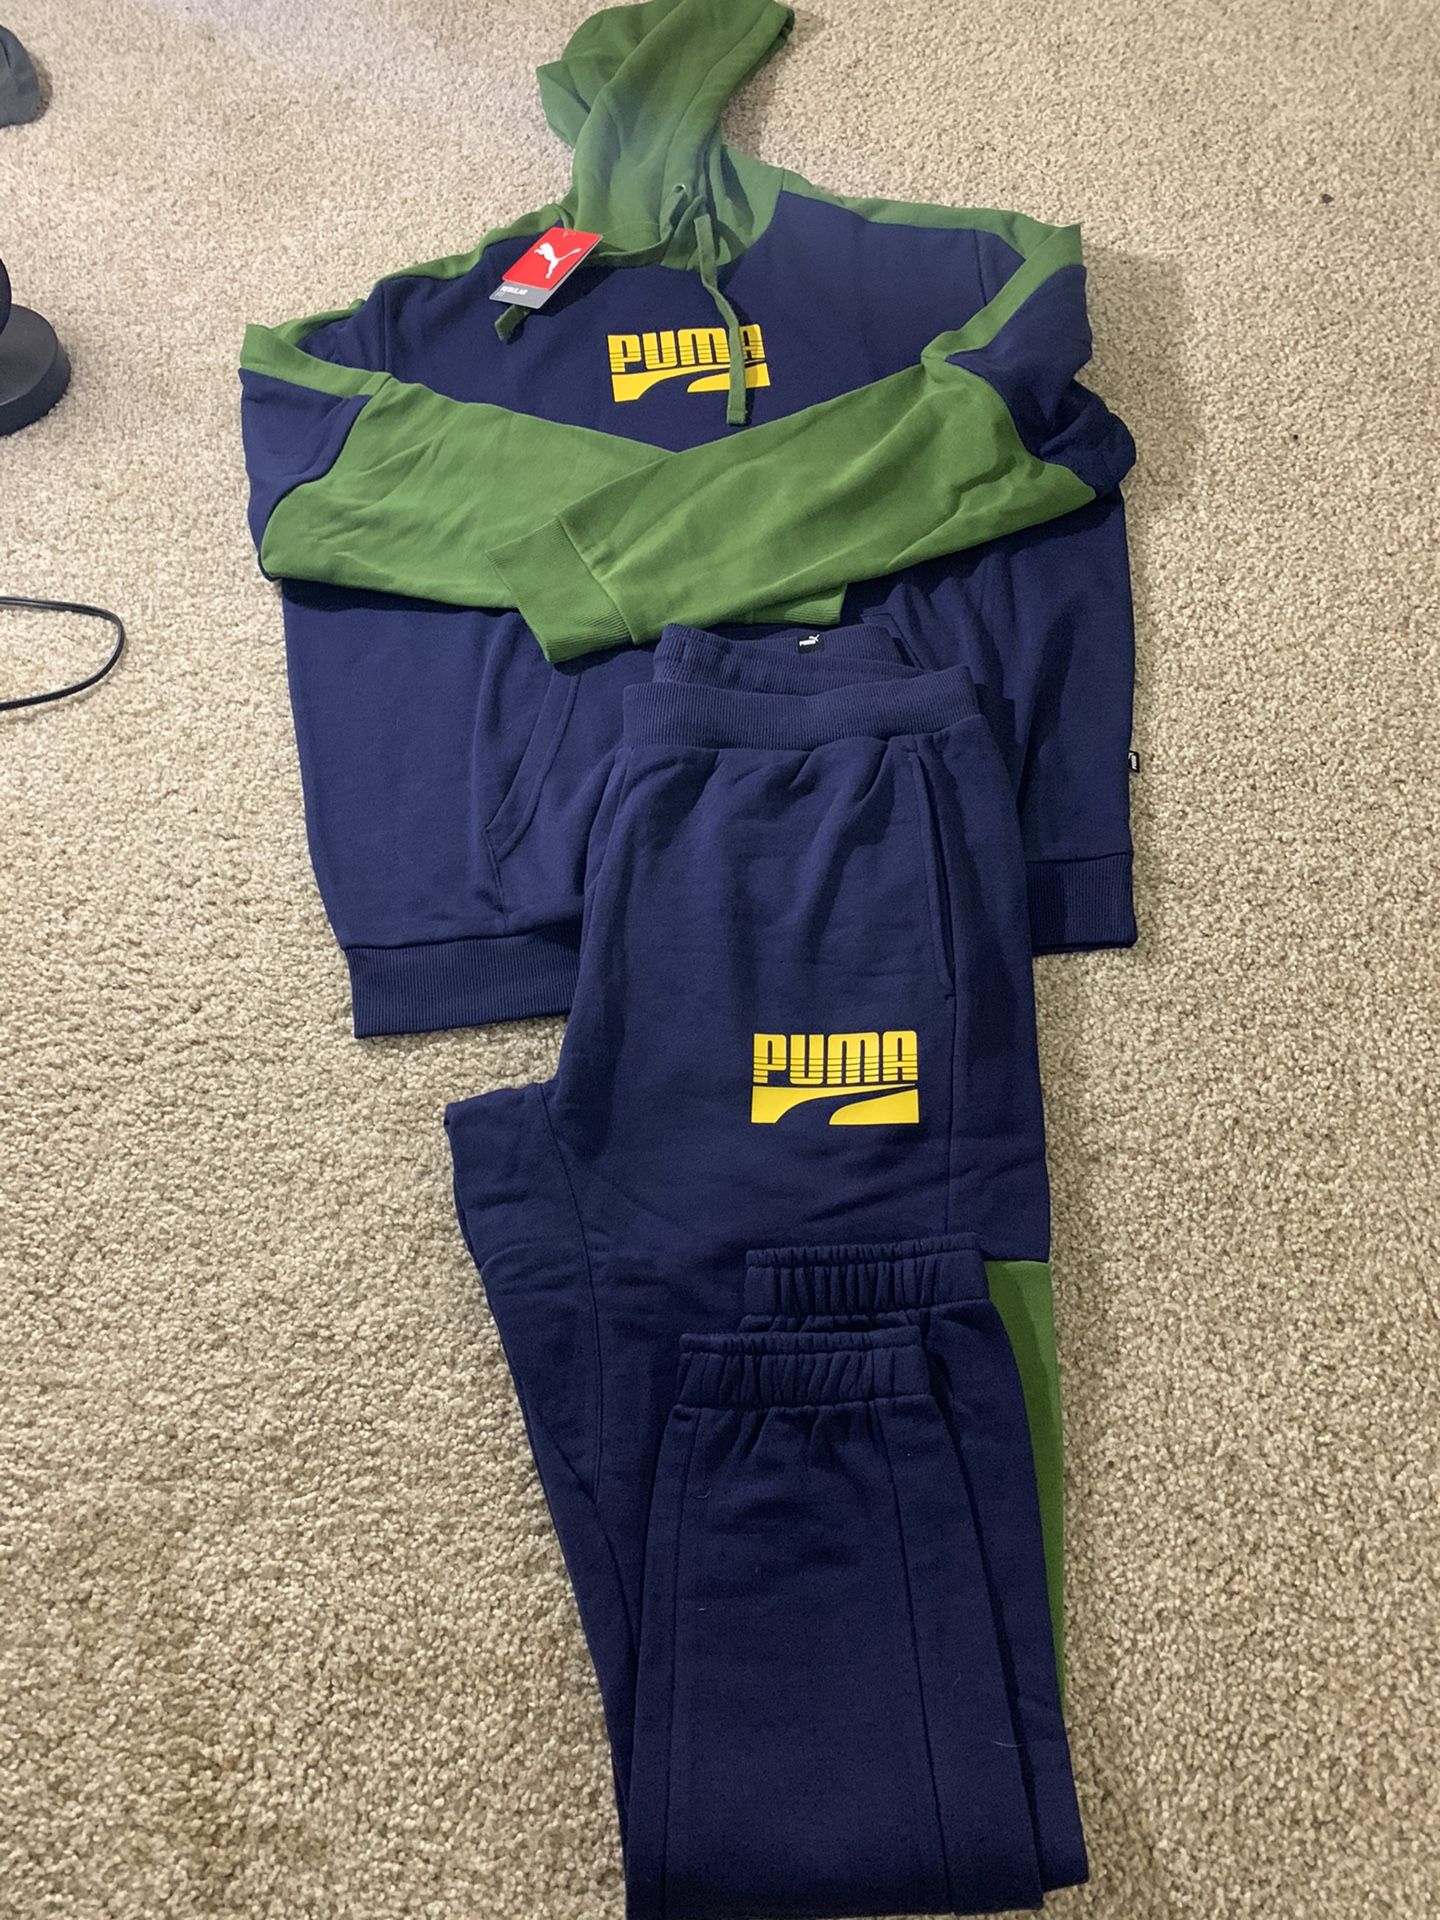 Puma Sweat Suit New With Tags